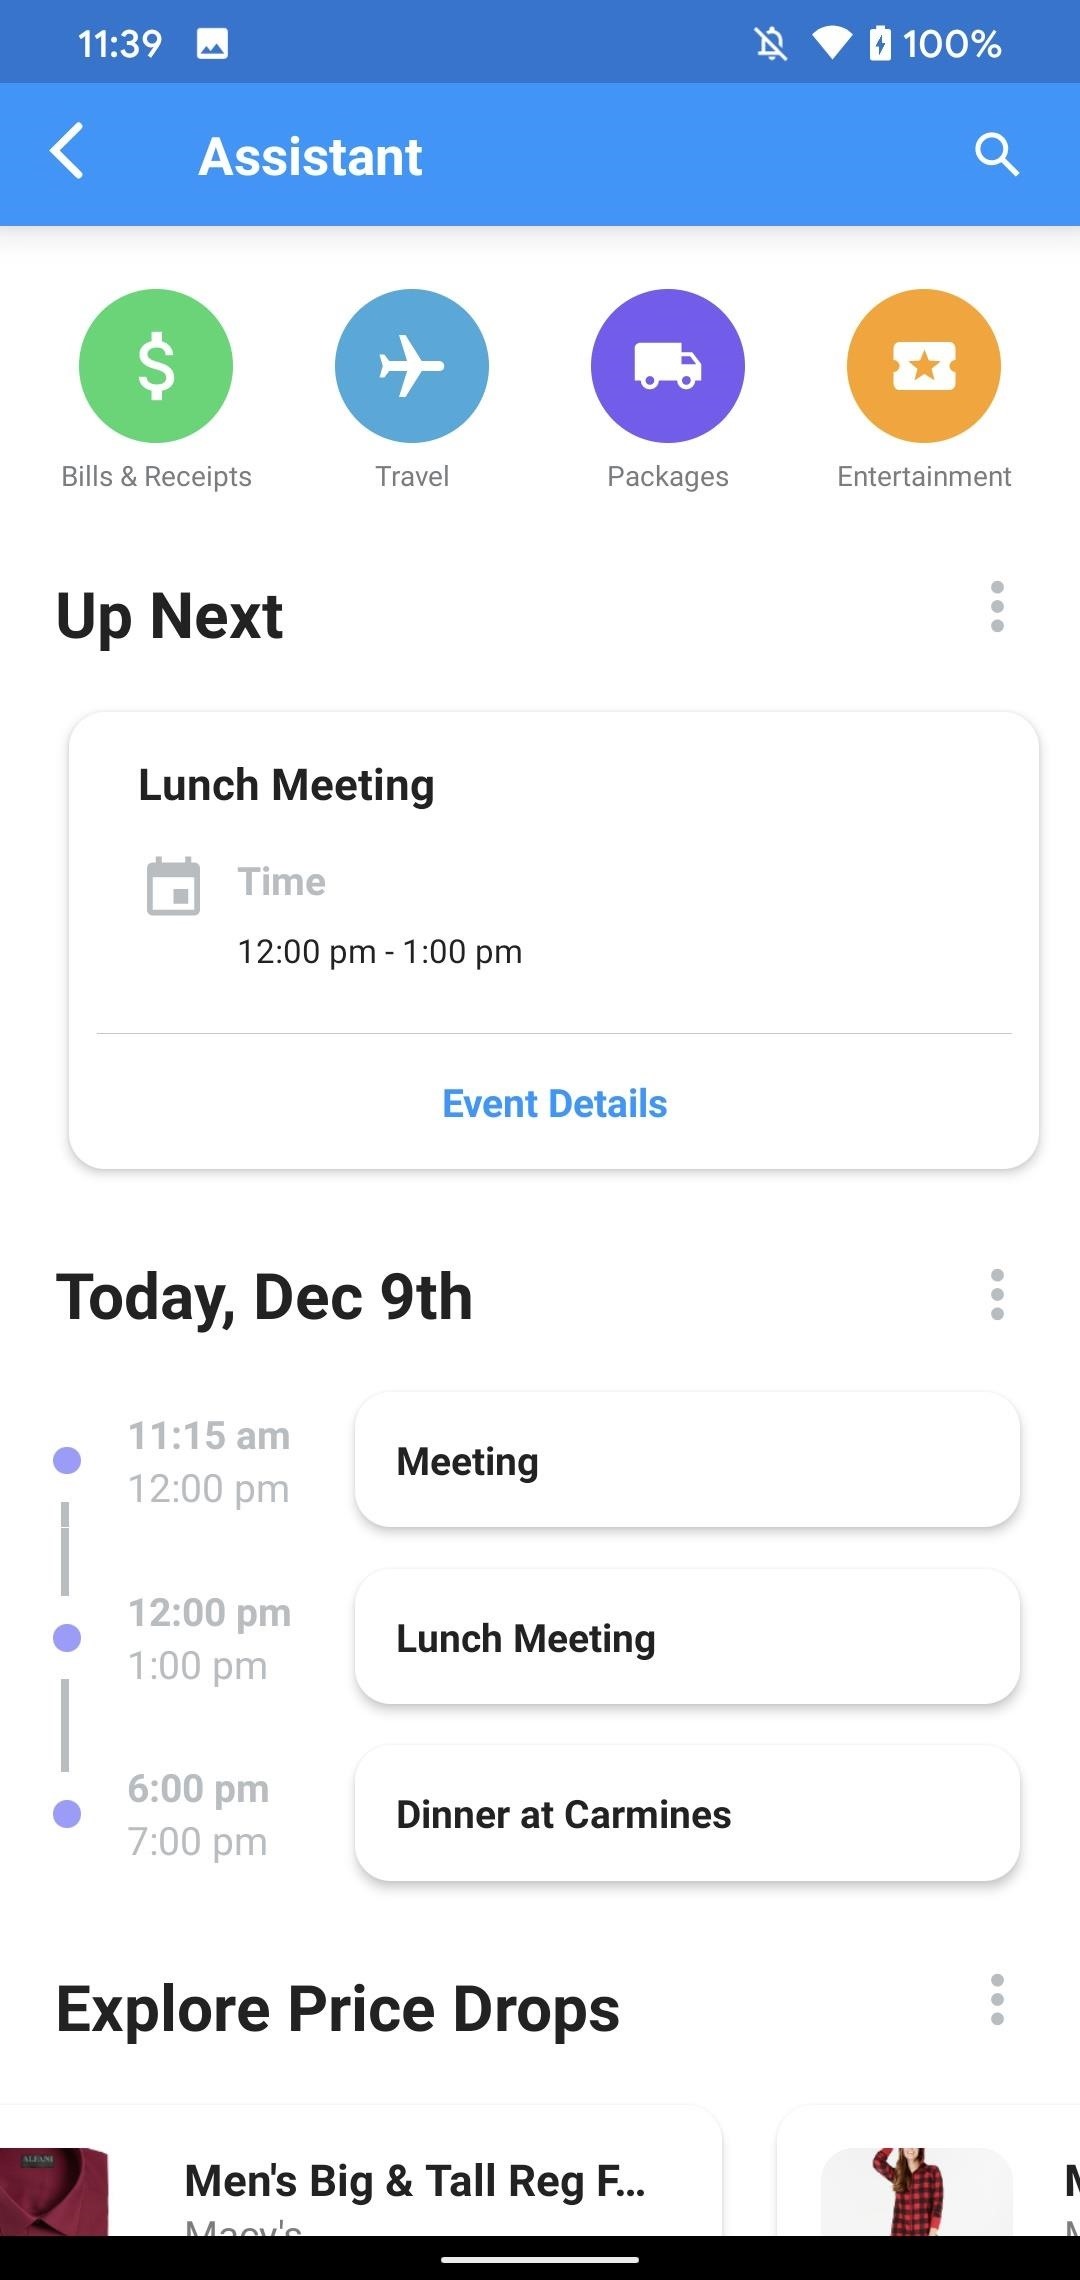 View Calendar Events & Invites in Edison Mail While Checking Your Email